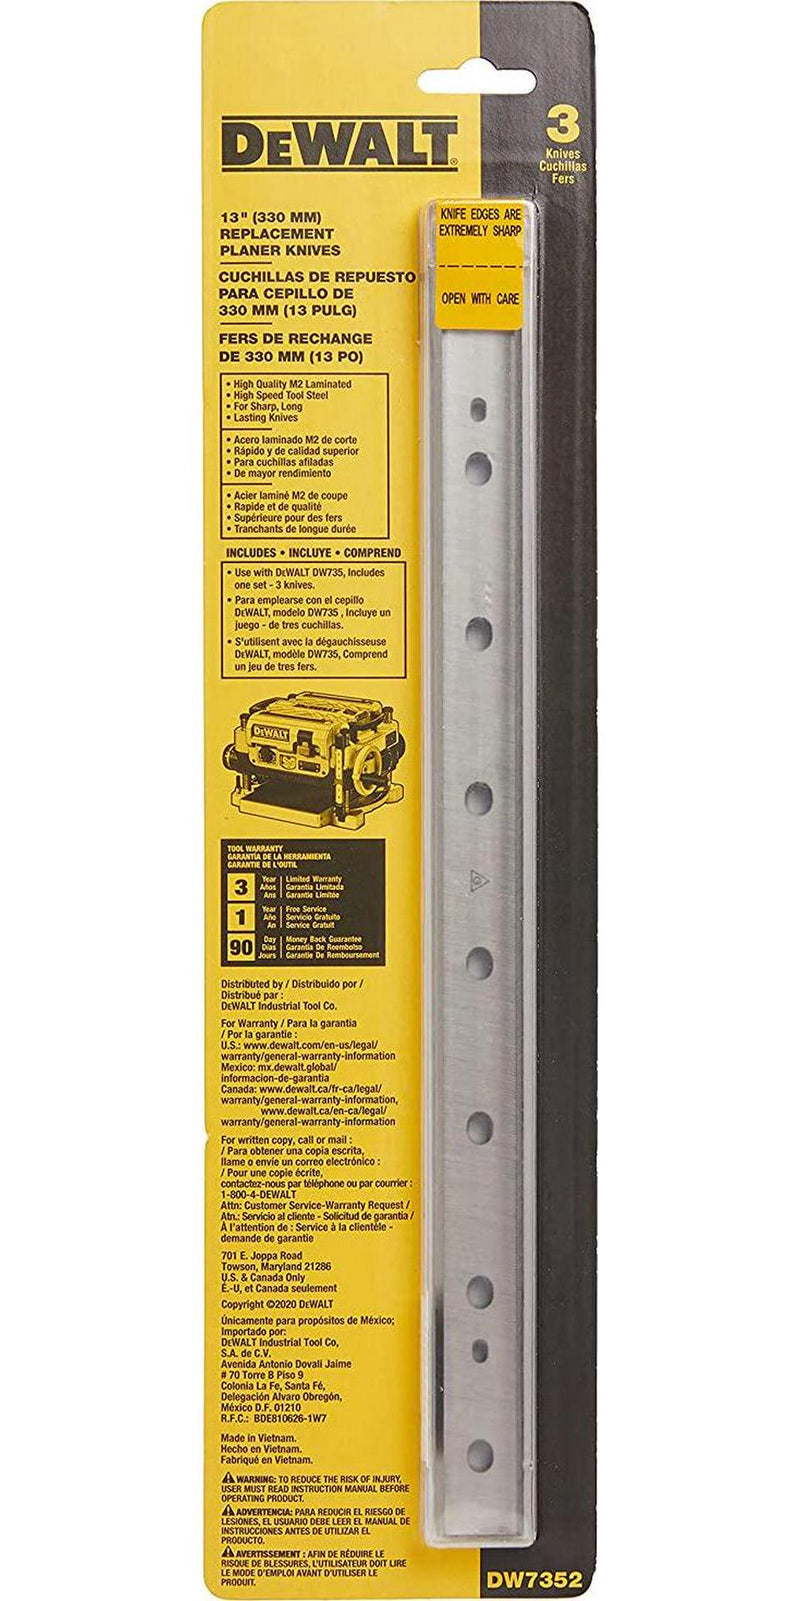 DEWALT DW7352 Planer Blades Replacement For Thicknesser 3 Pk, Pack of 1